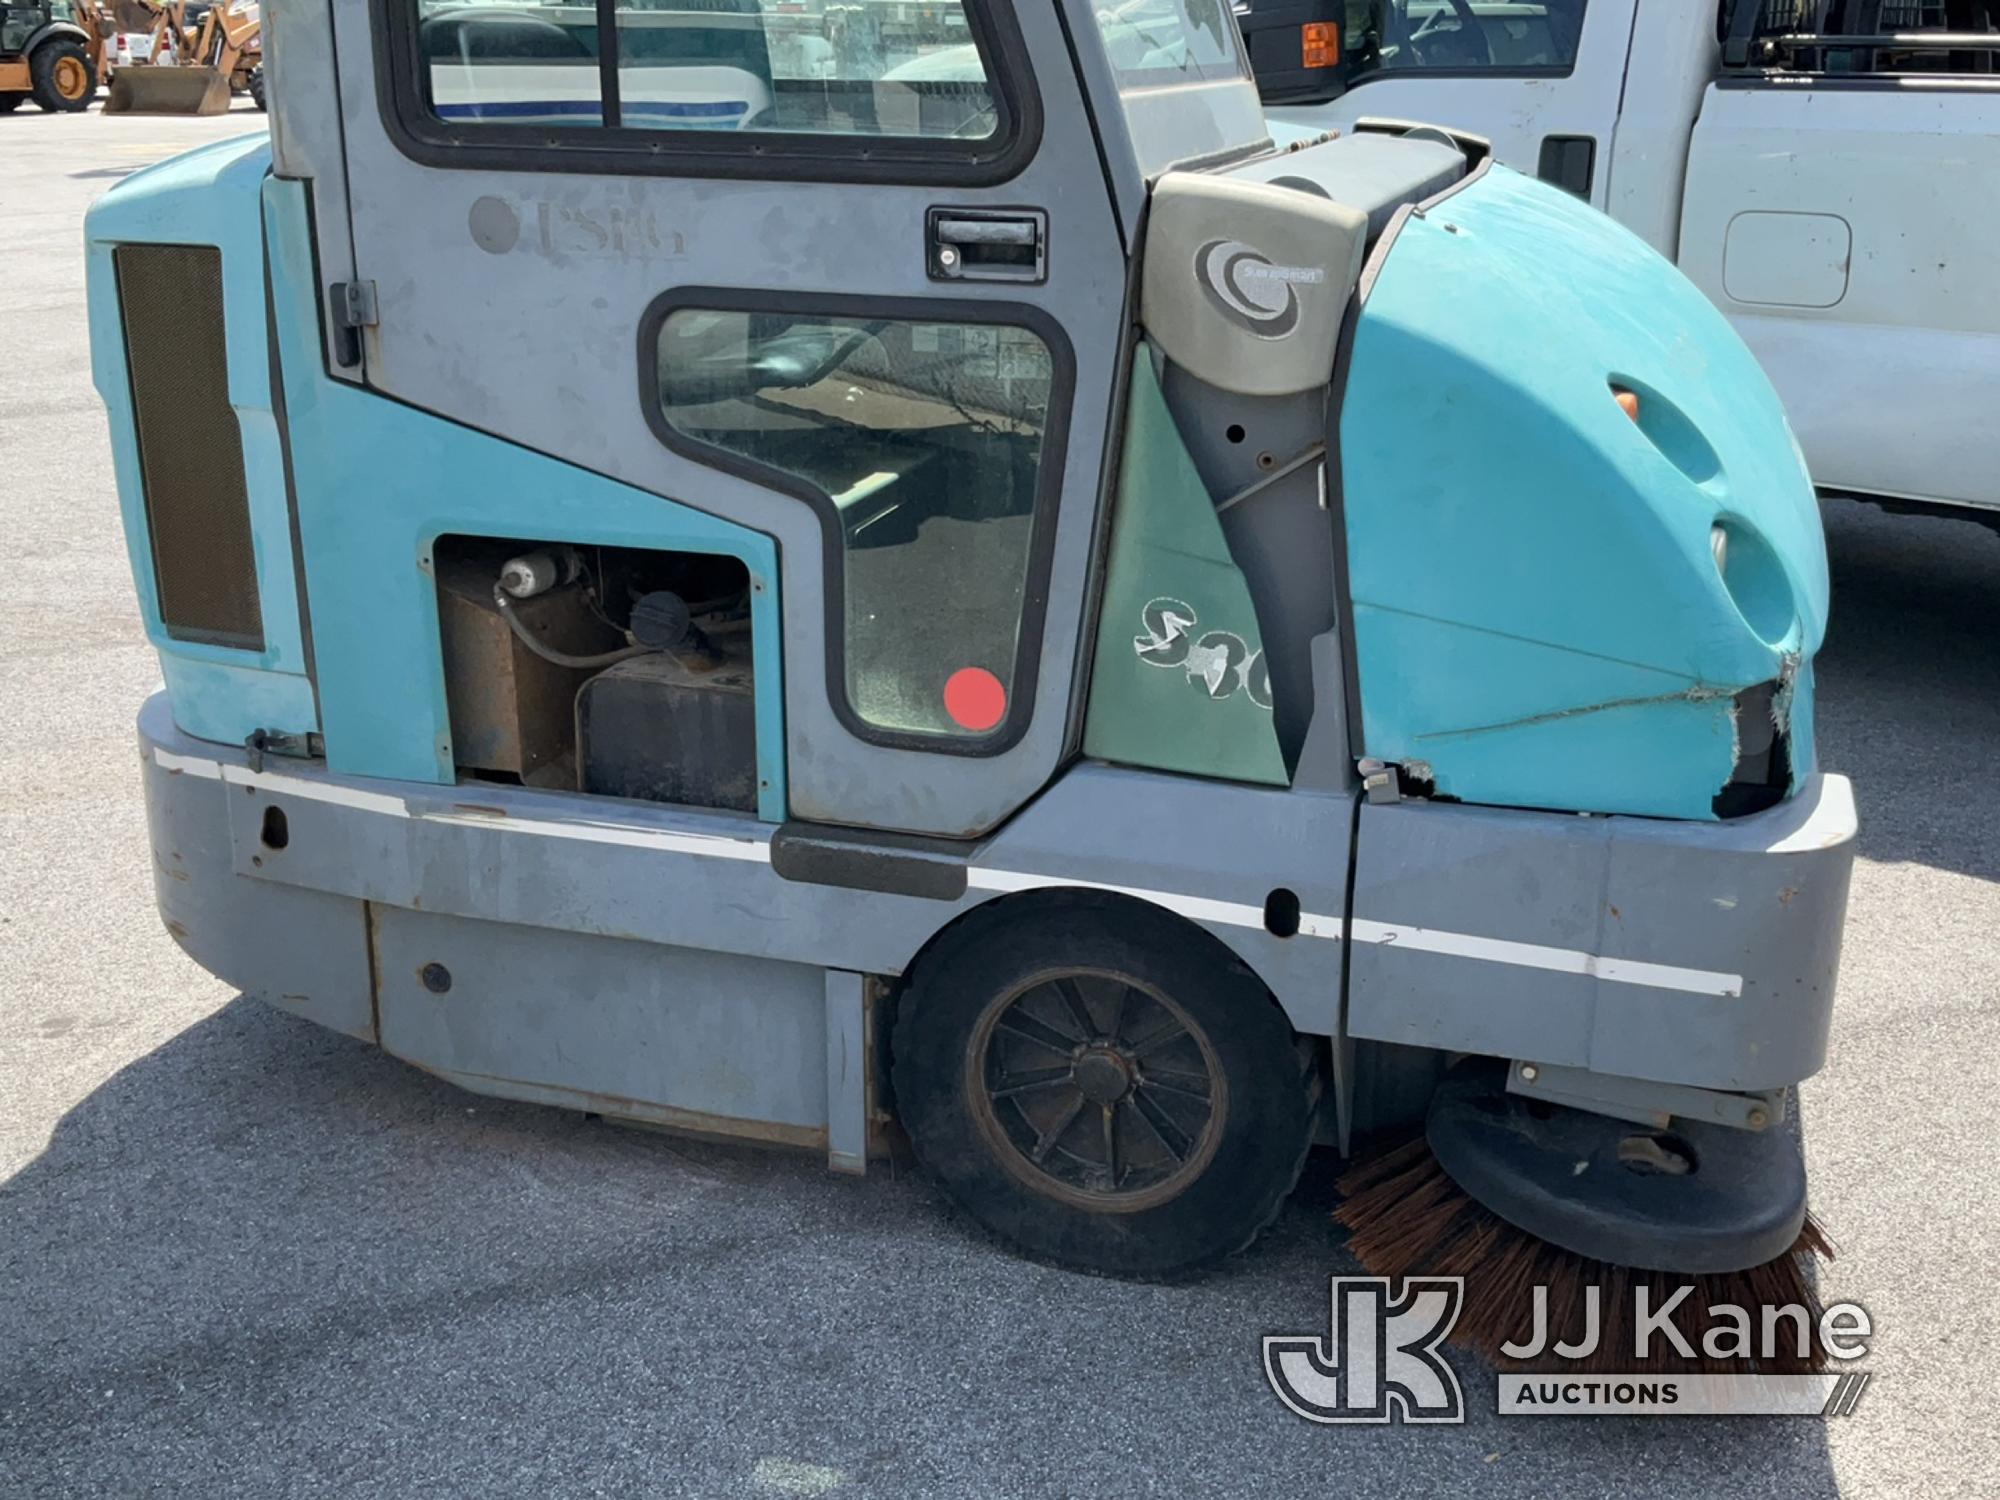 (Chester Springs, PA) Tennant S30 Industrial Ride On Sweeper Not Running, Condition Unknown) (Inspec